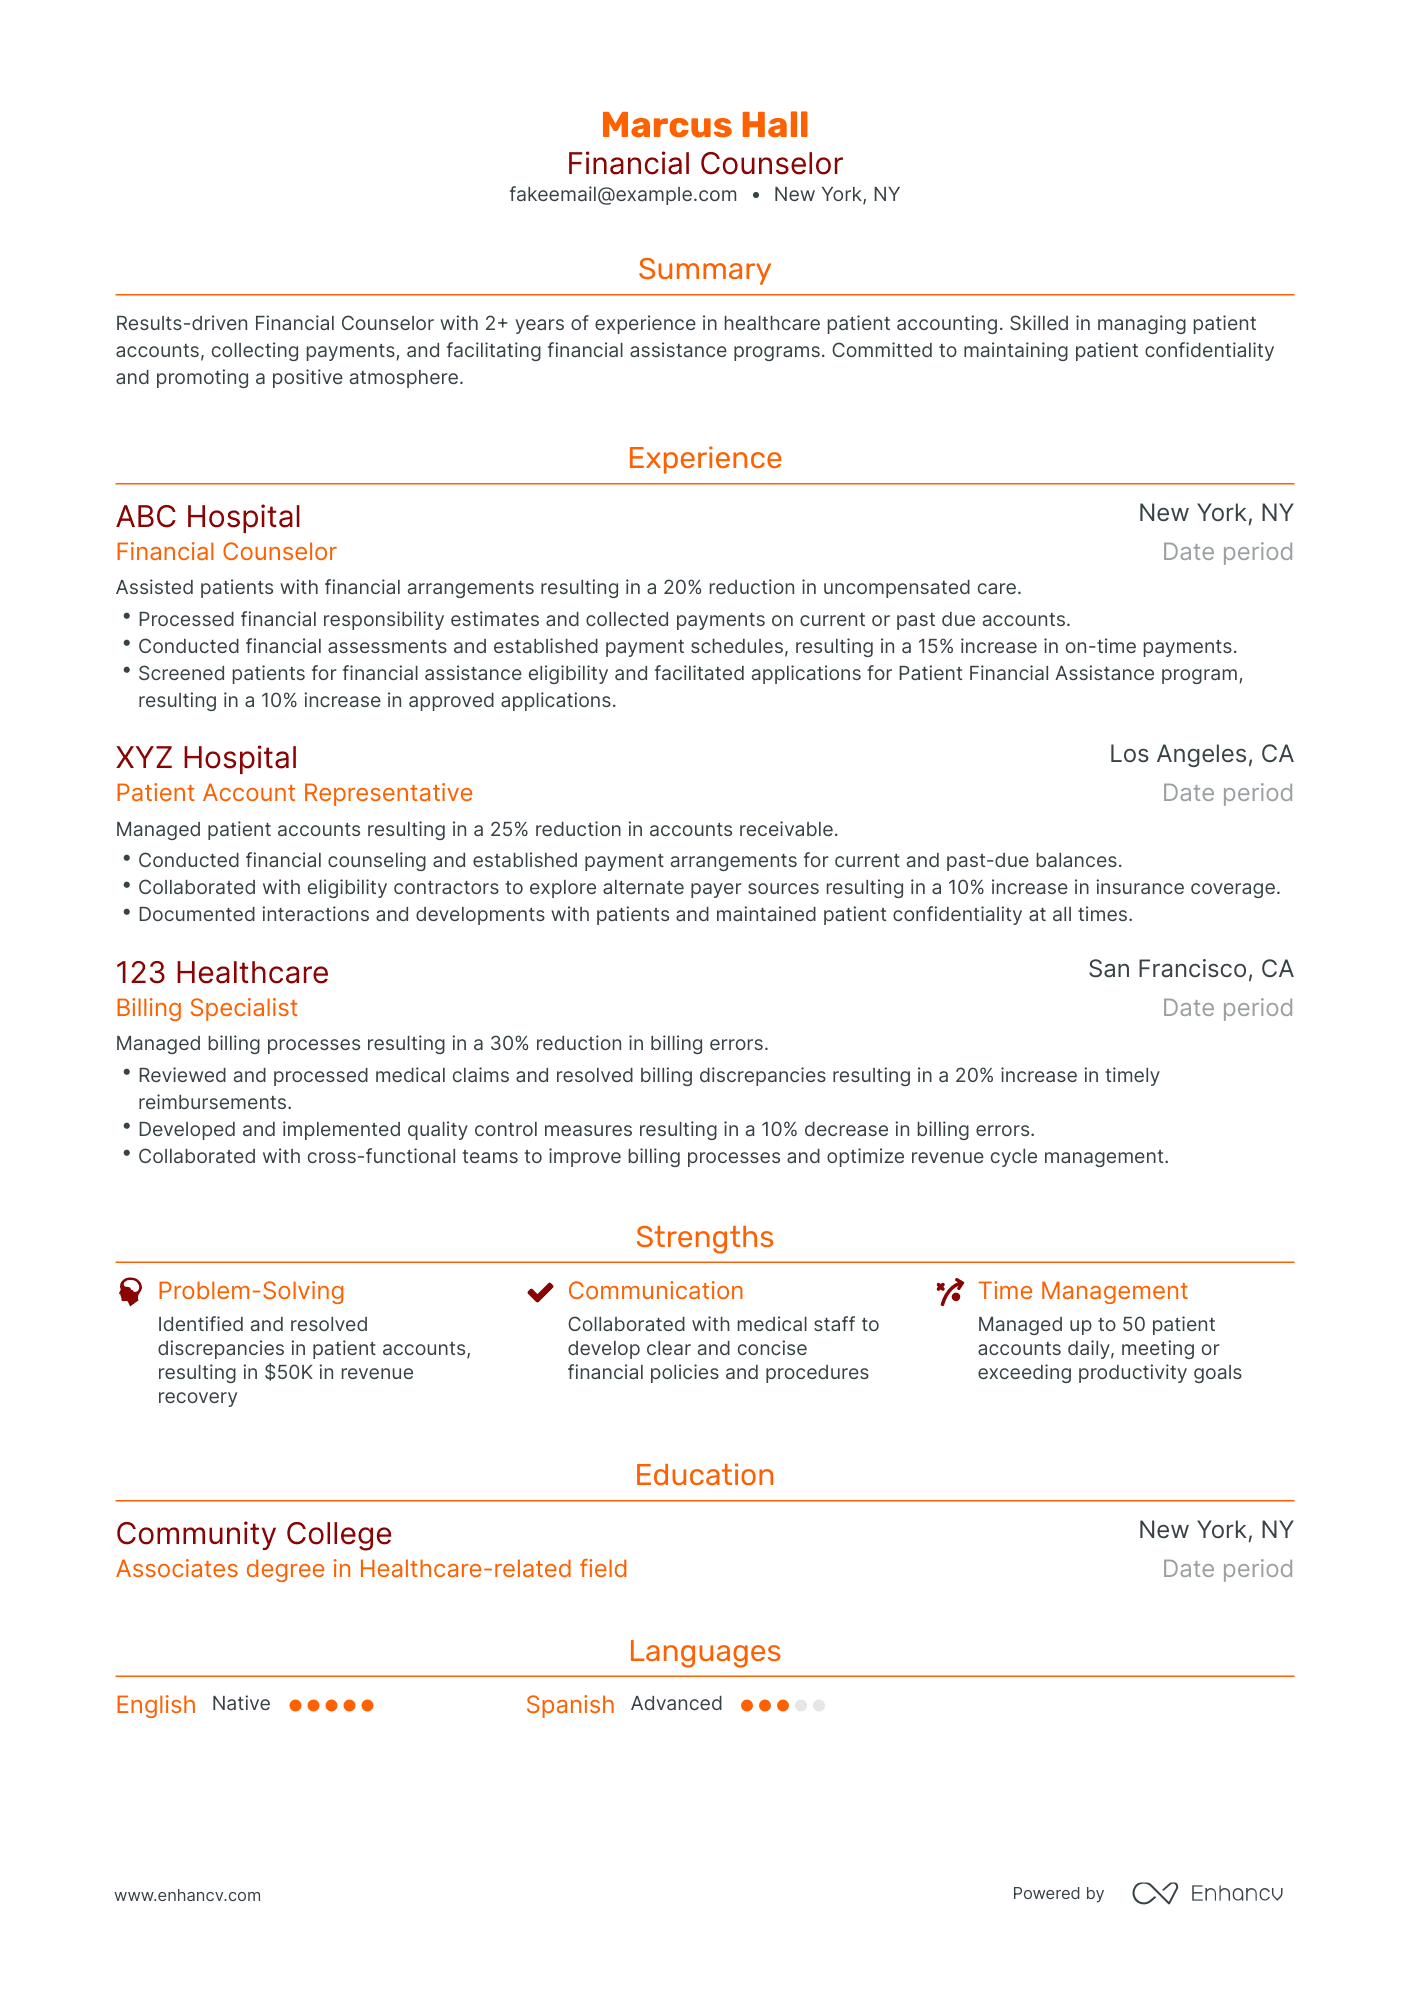 Traditional Financial Counselor Resume Template